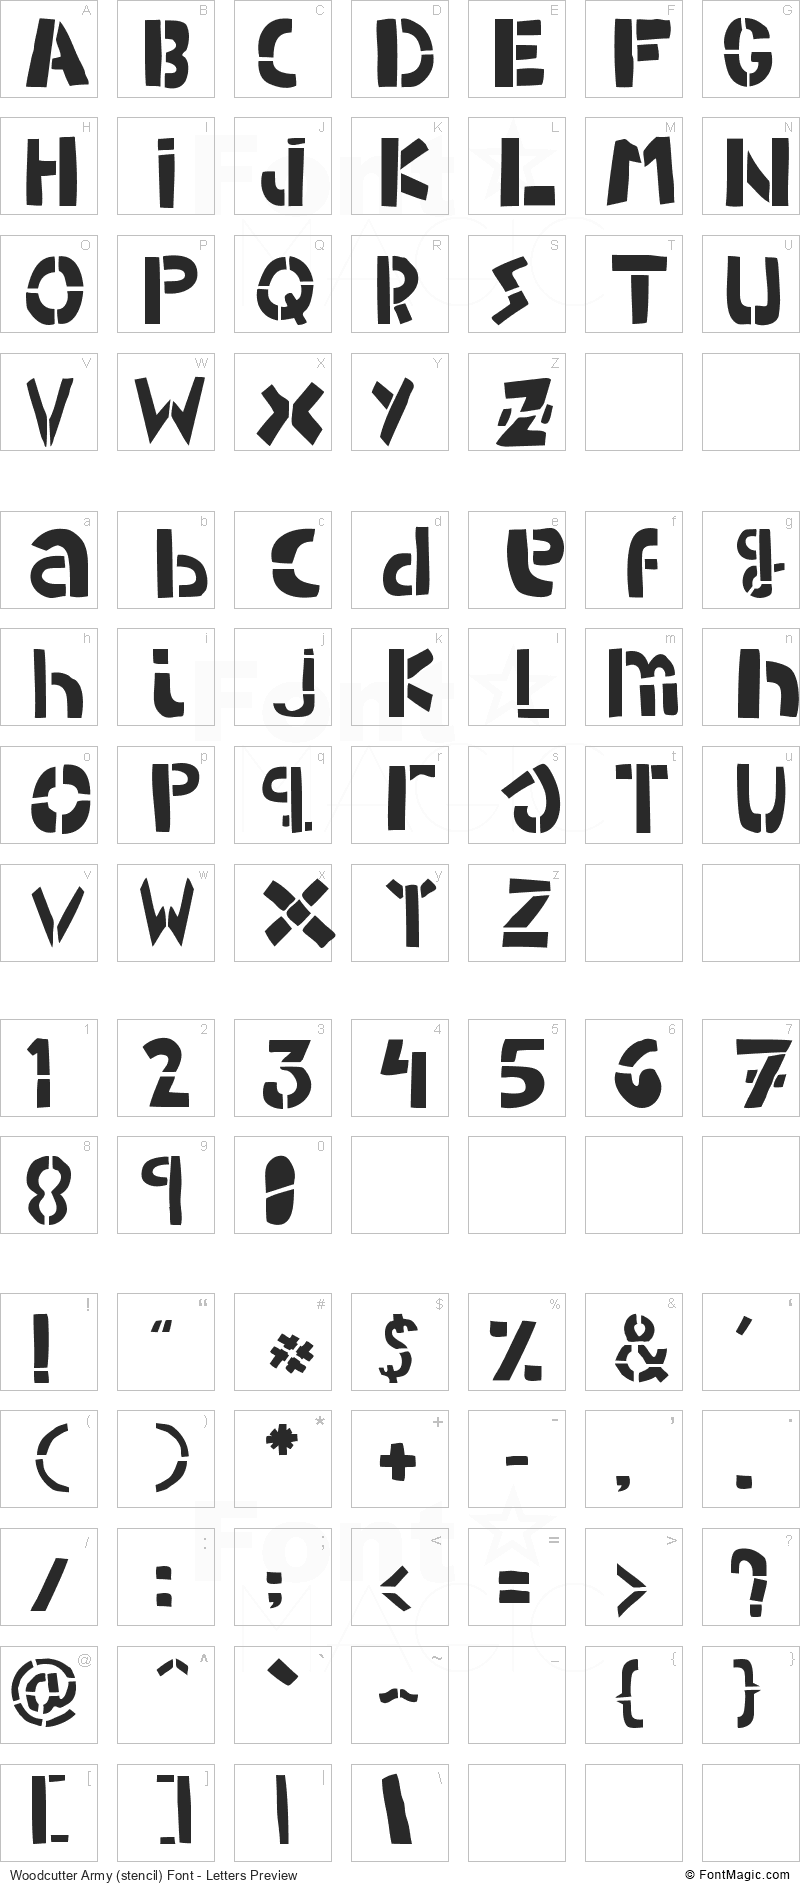 Woodcutter Army (stencil) Font - All Latters Preview Chart